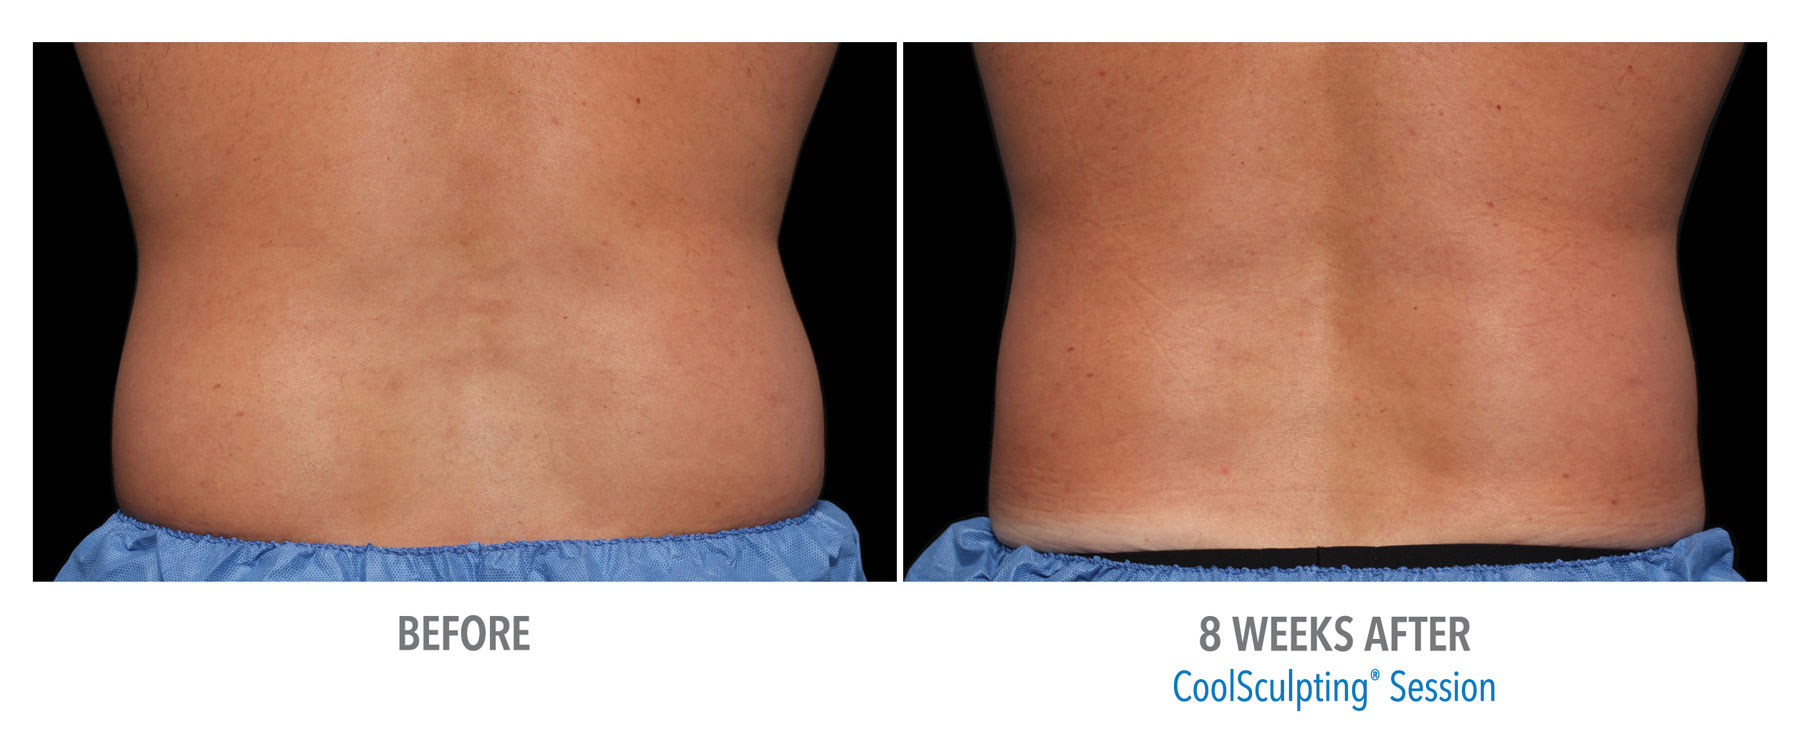 CoolSculpting-Before-After-Male-Flank-Back-View